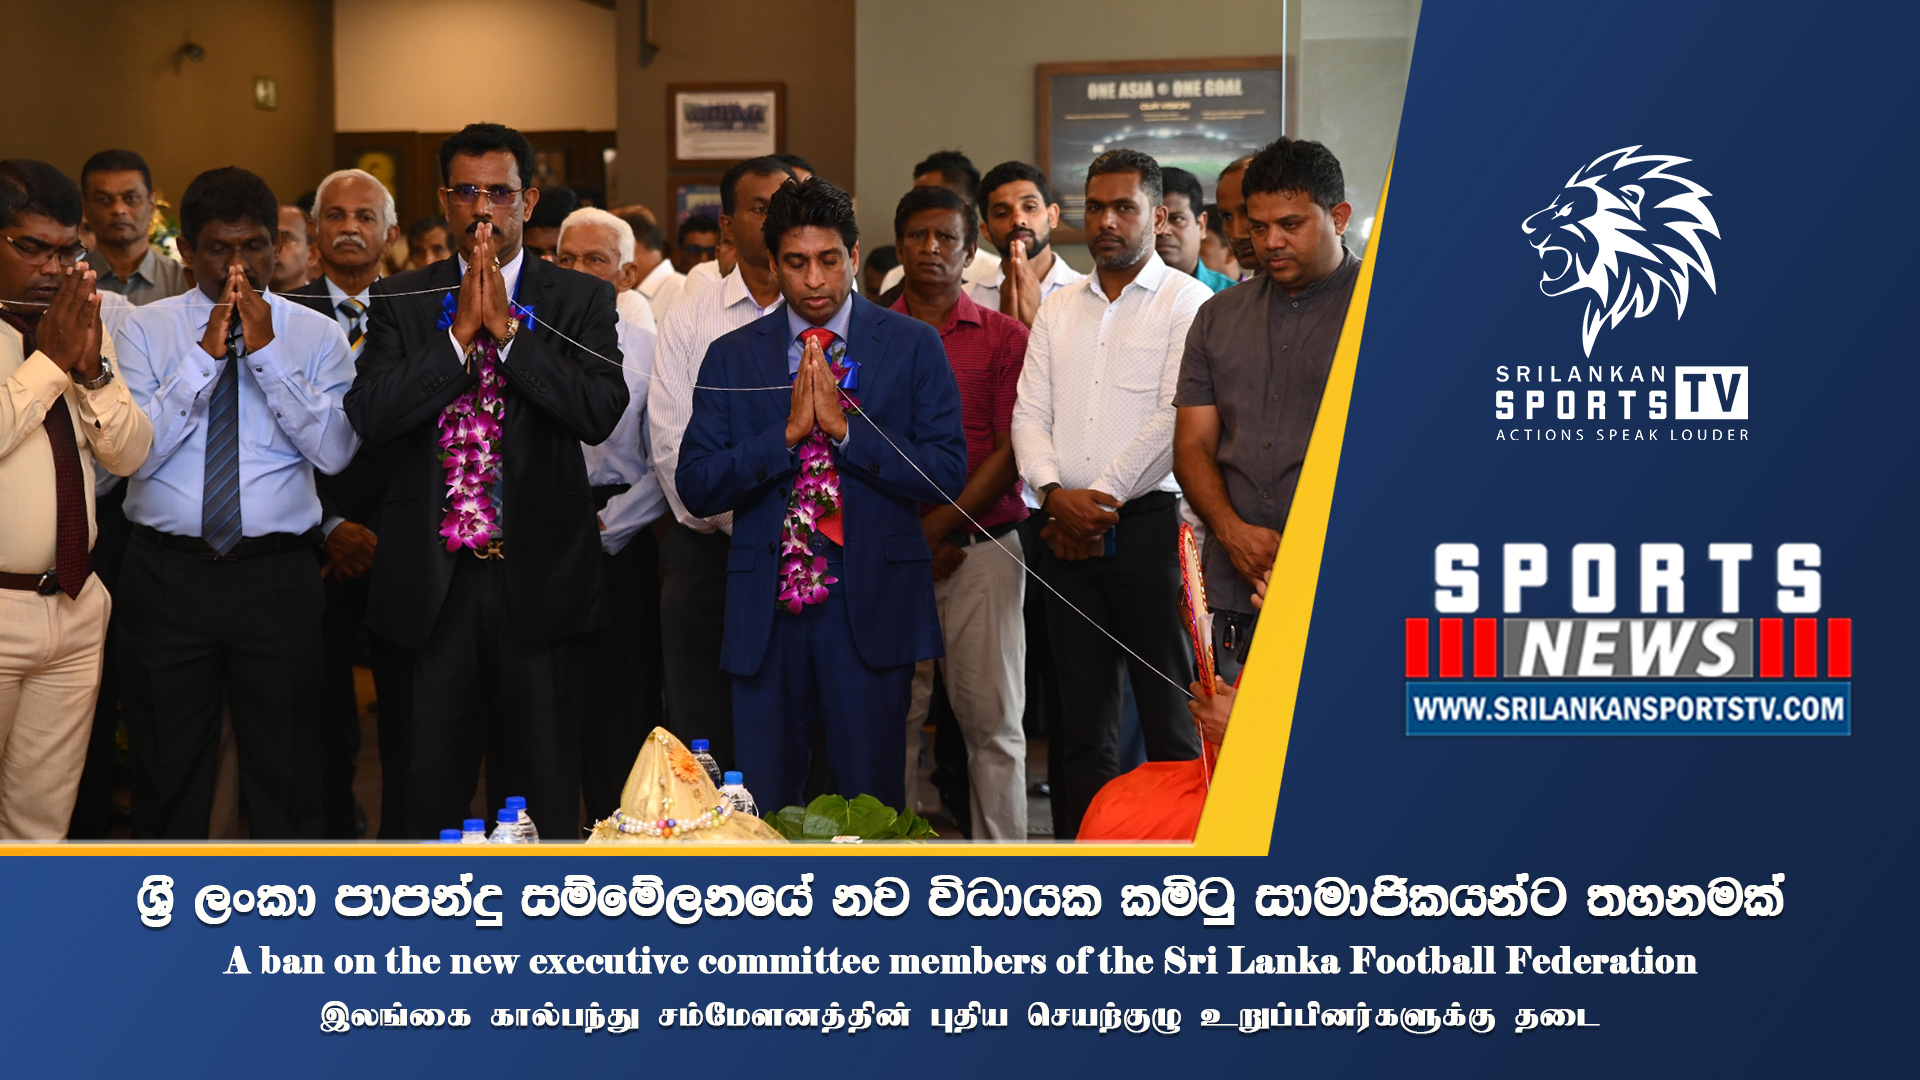 A ban on the new Executive Committee members of the Sri Lanka Football Federation